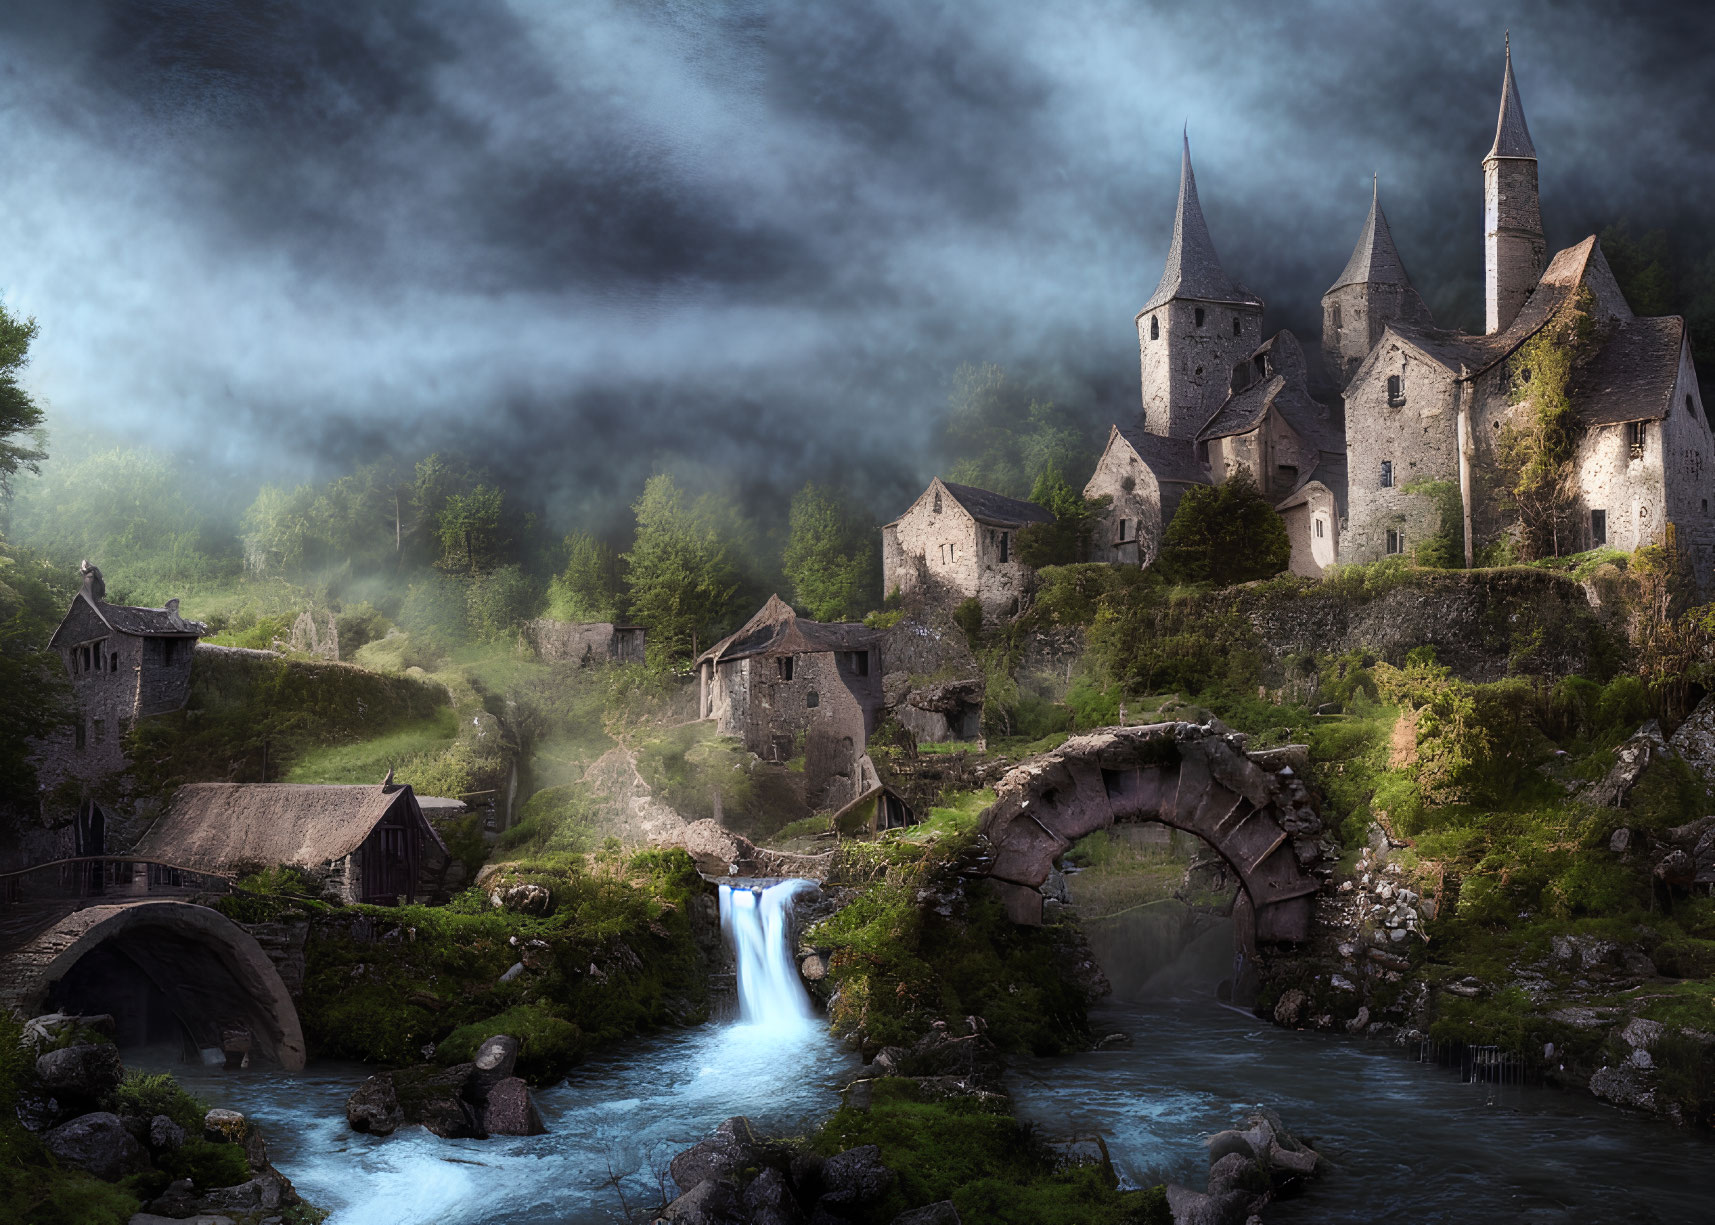 Medieval village with stone houses, castle, and waterfall under cloudy sky